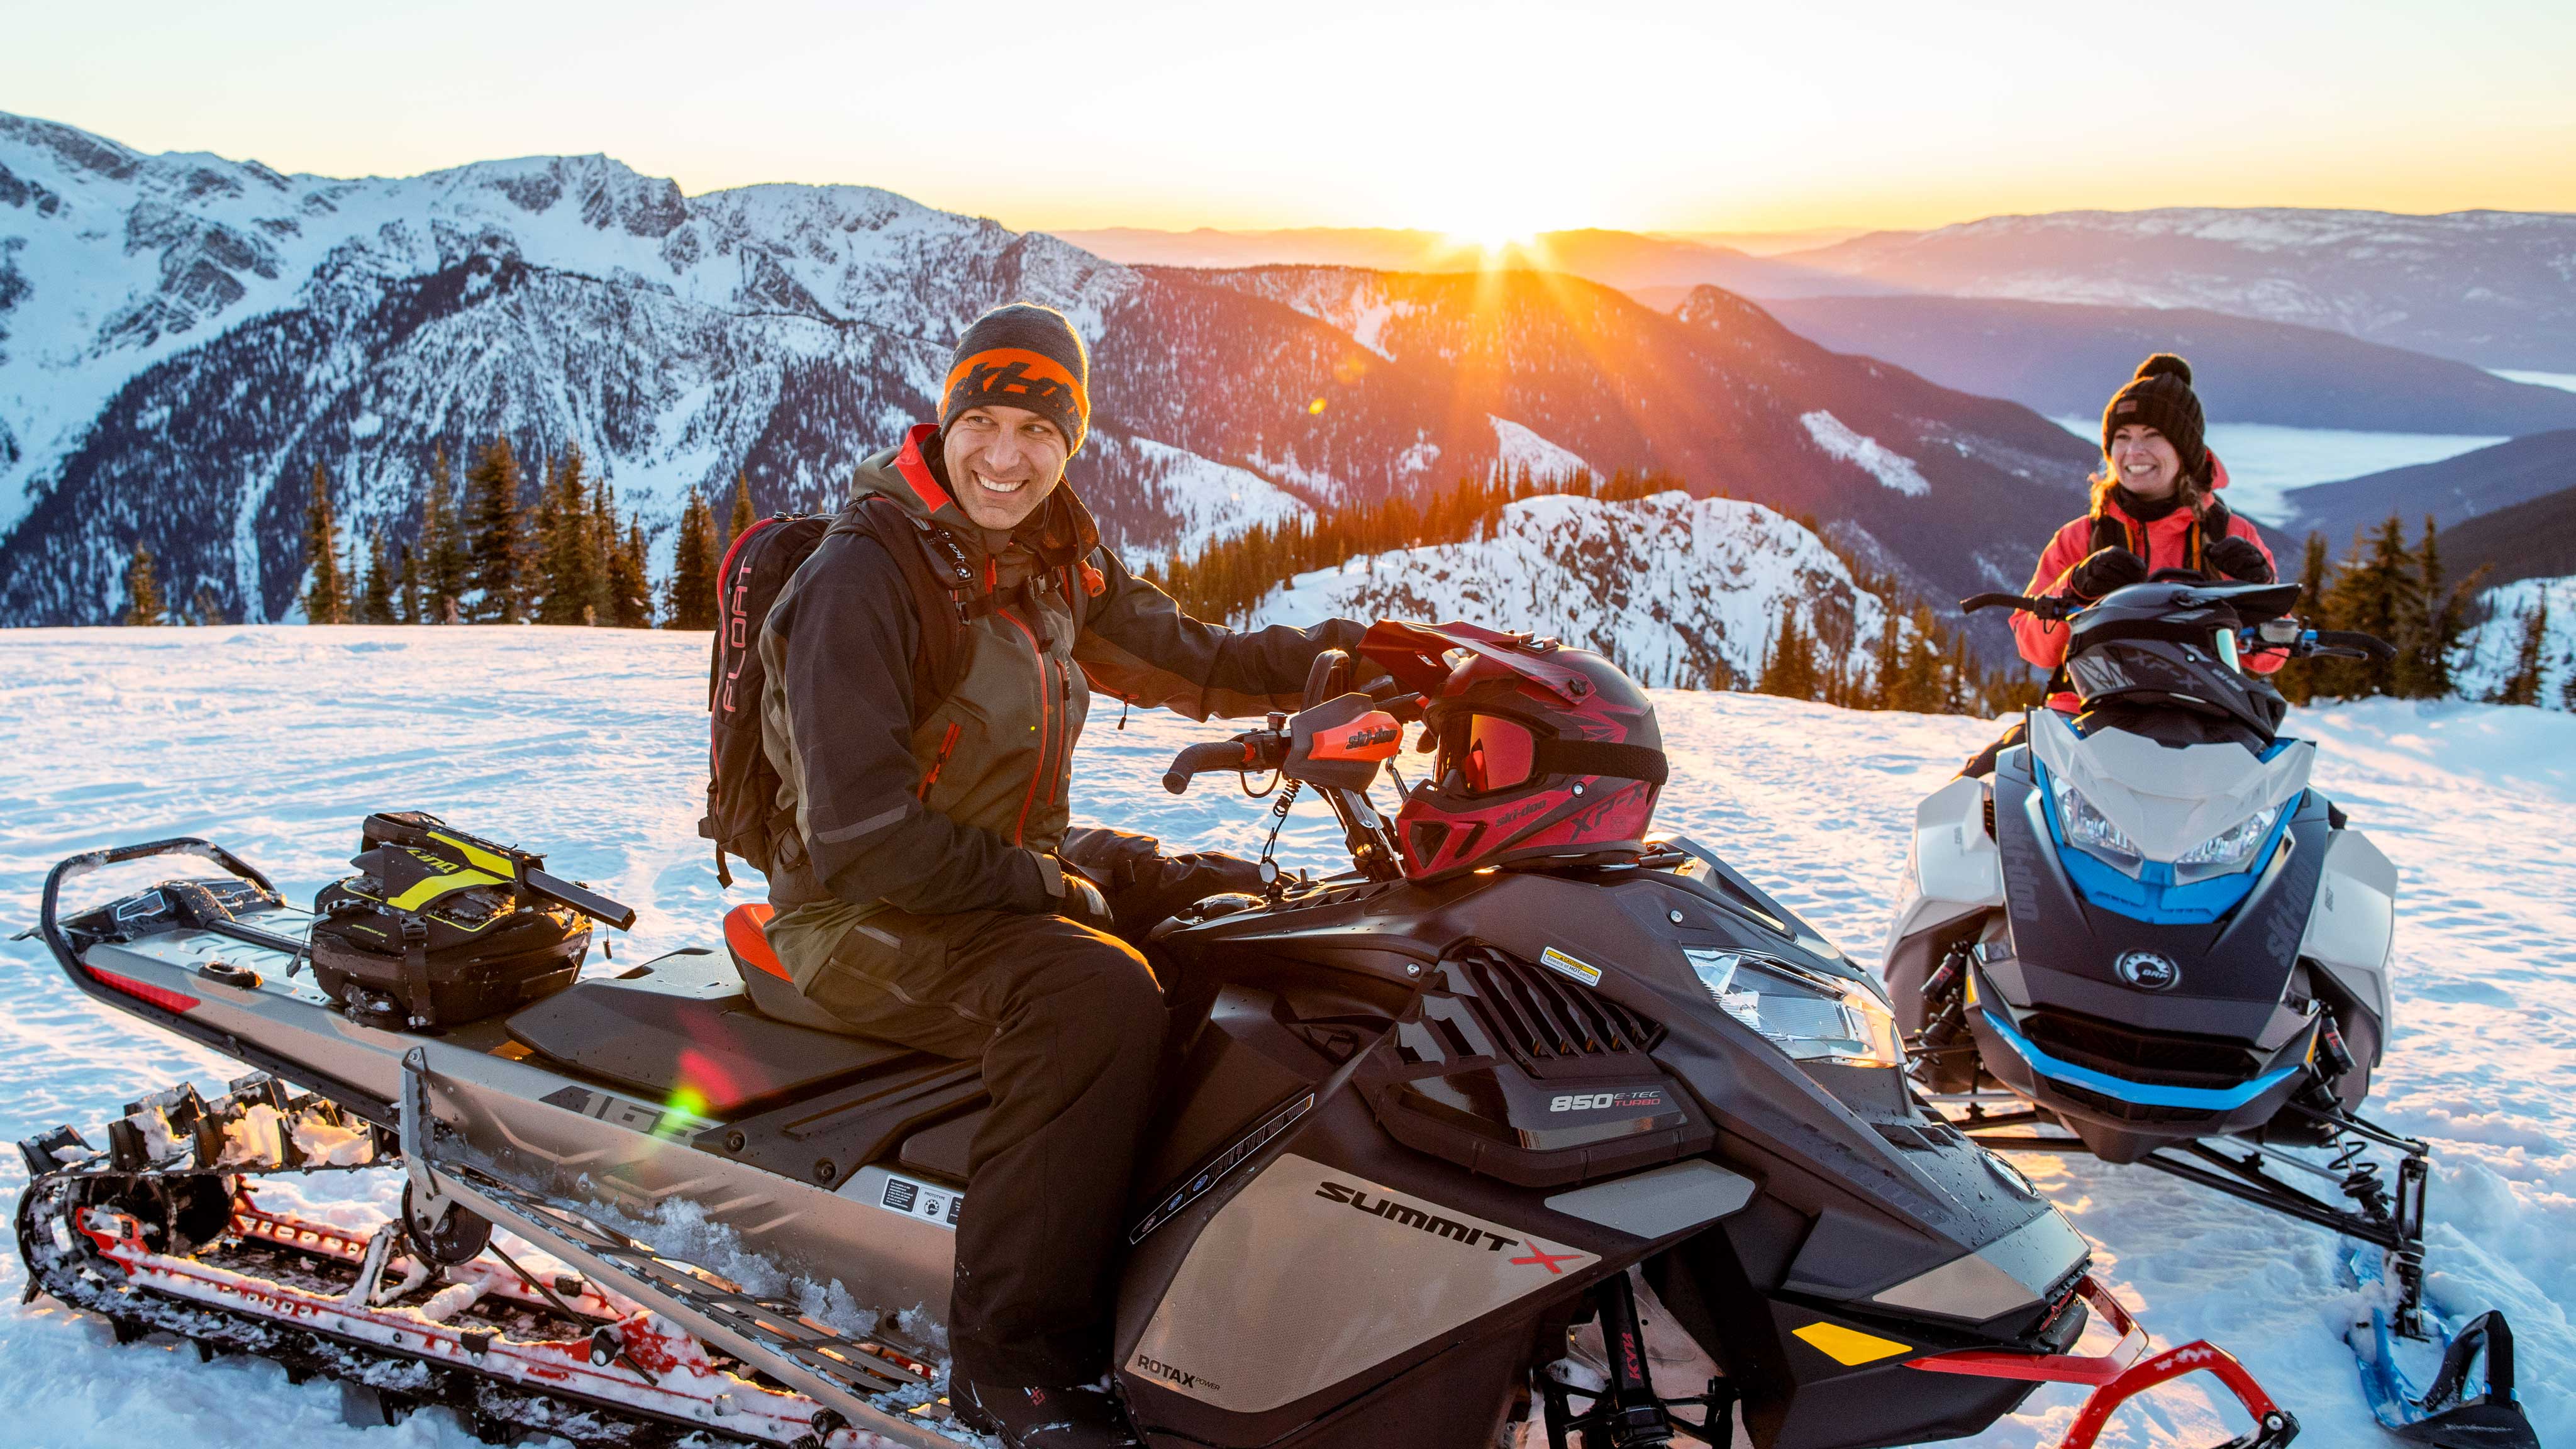 Riders on their snowmobiles at the top of a mountain